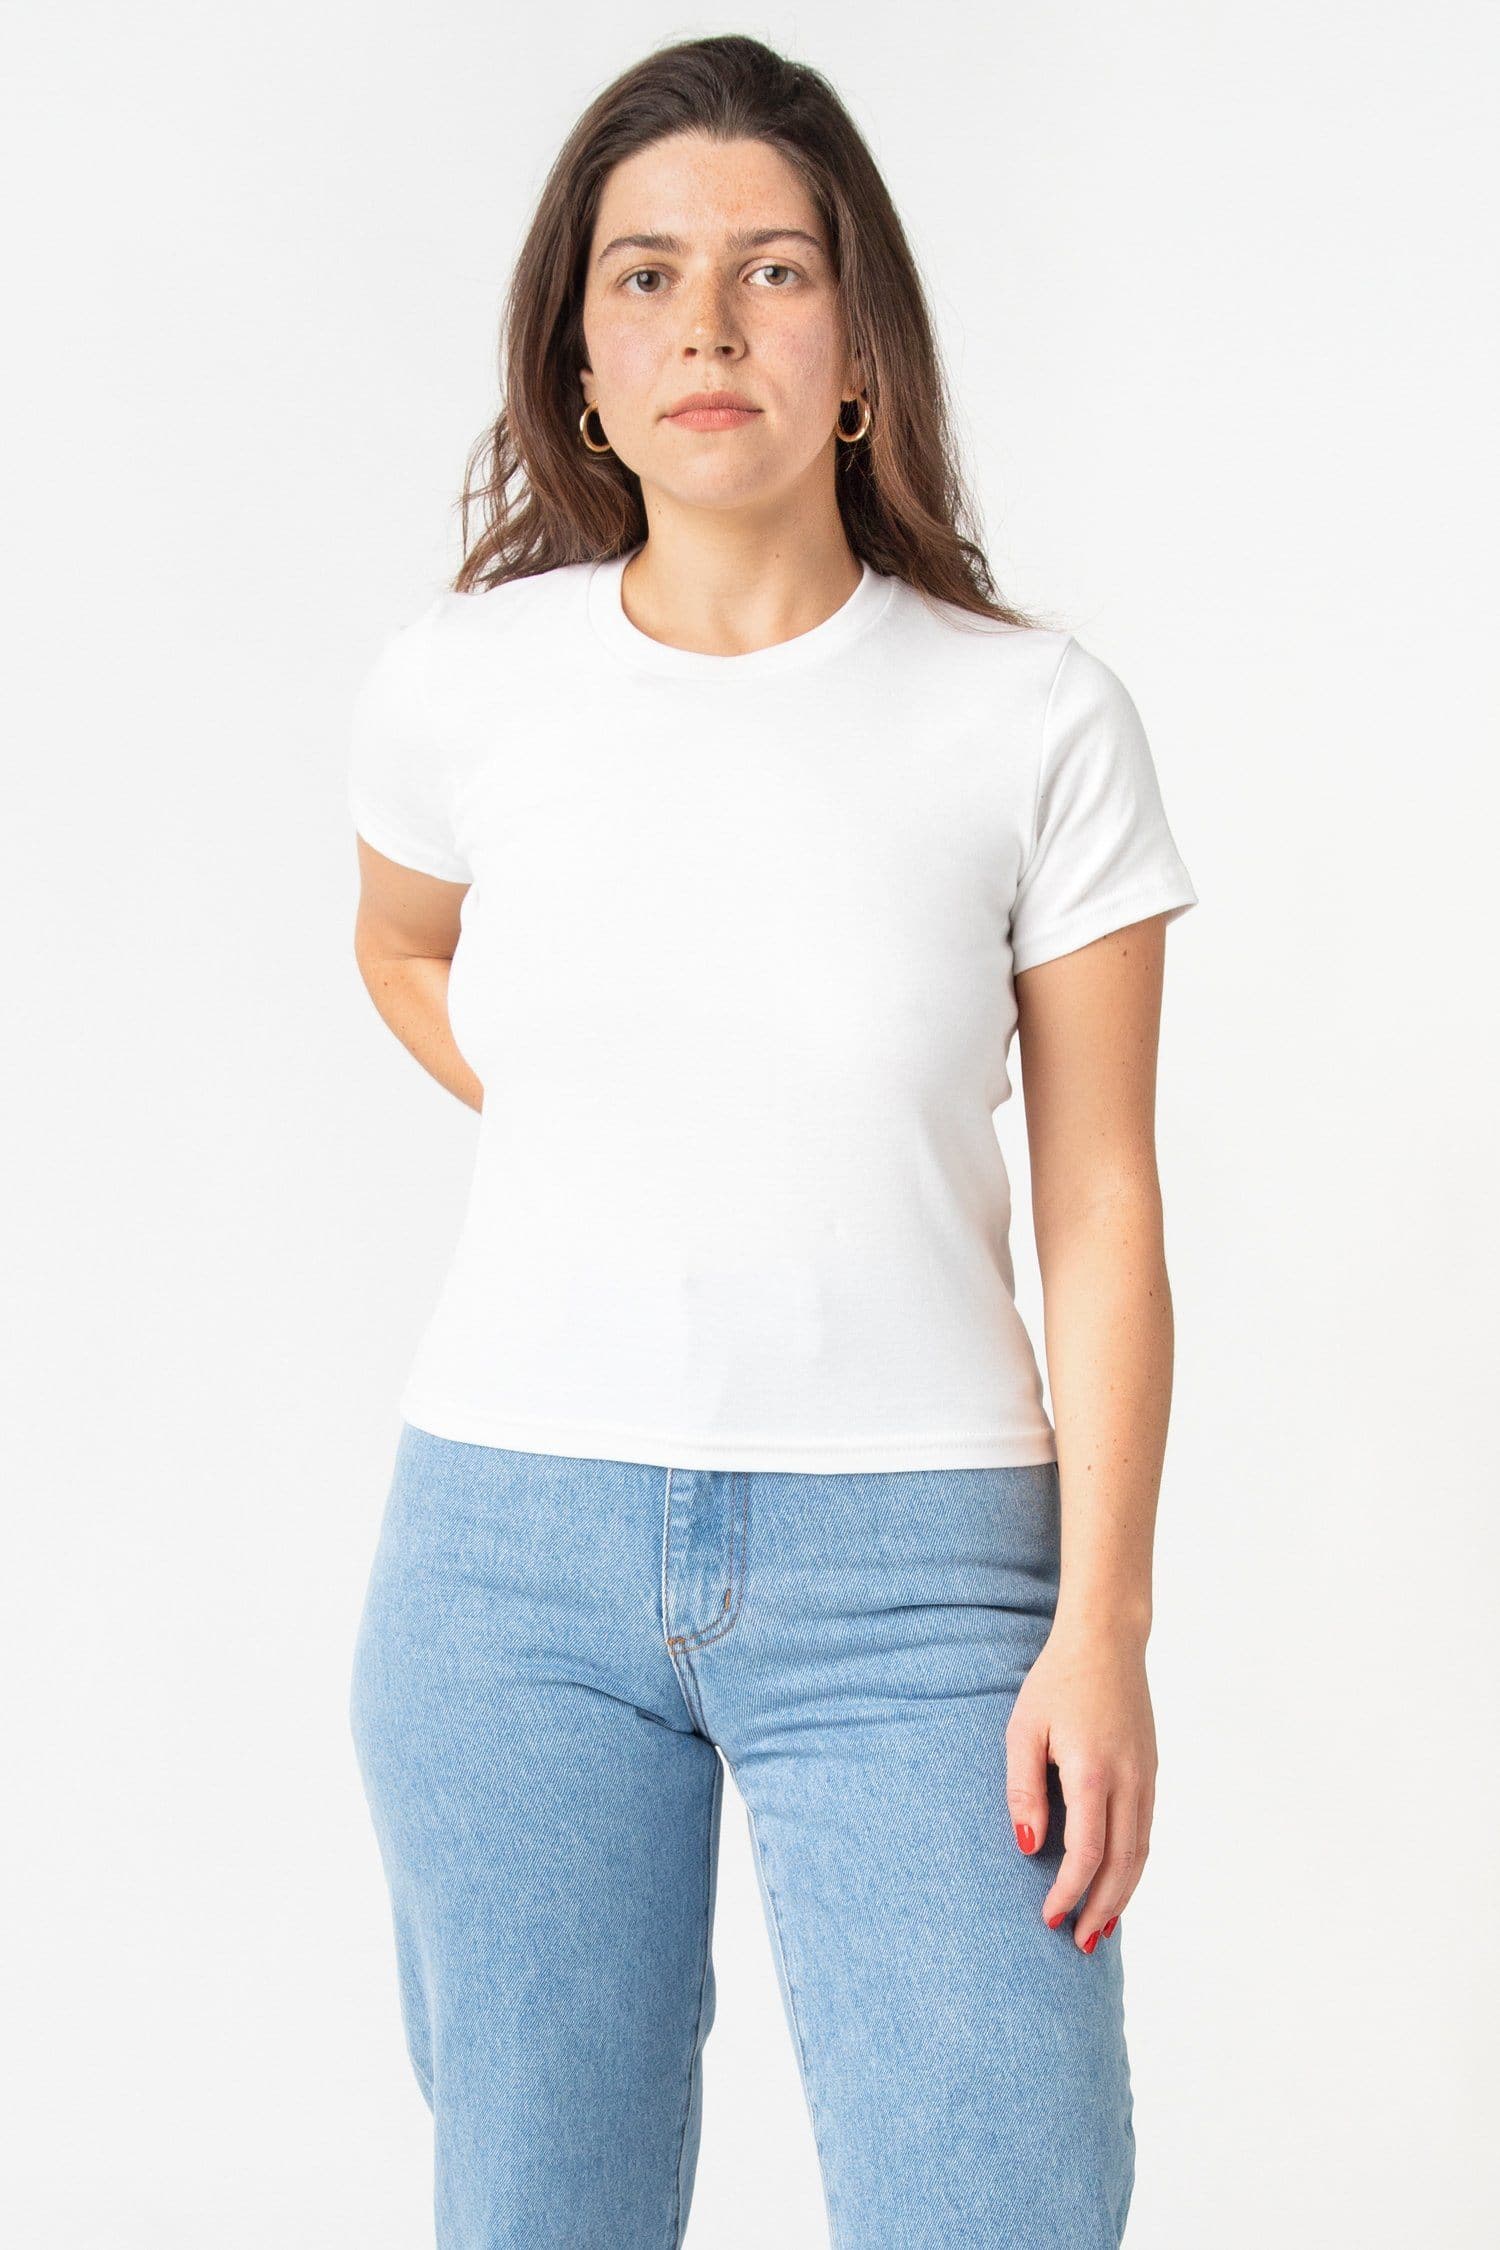 Los Angeles Apparel | Crew Neck Baby T-Shirt for Women in White, Size M/Os